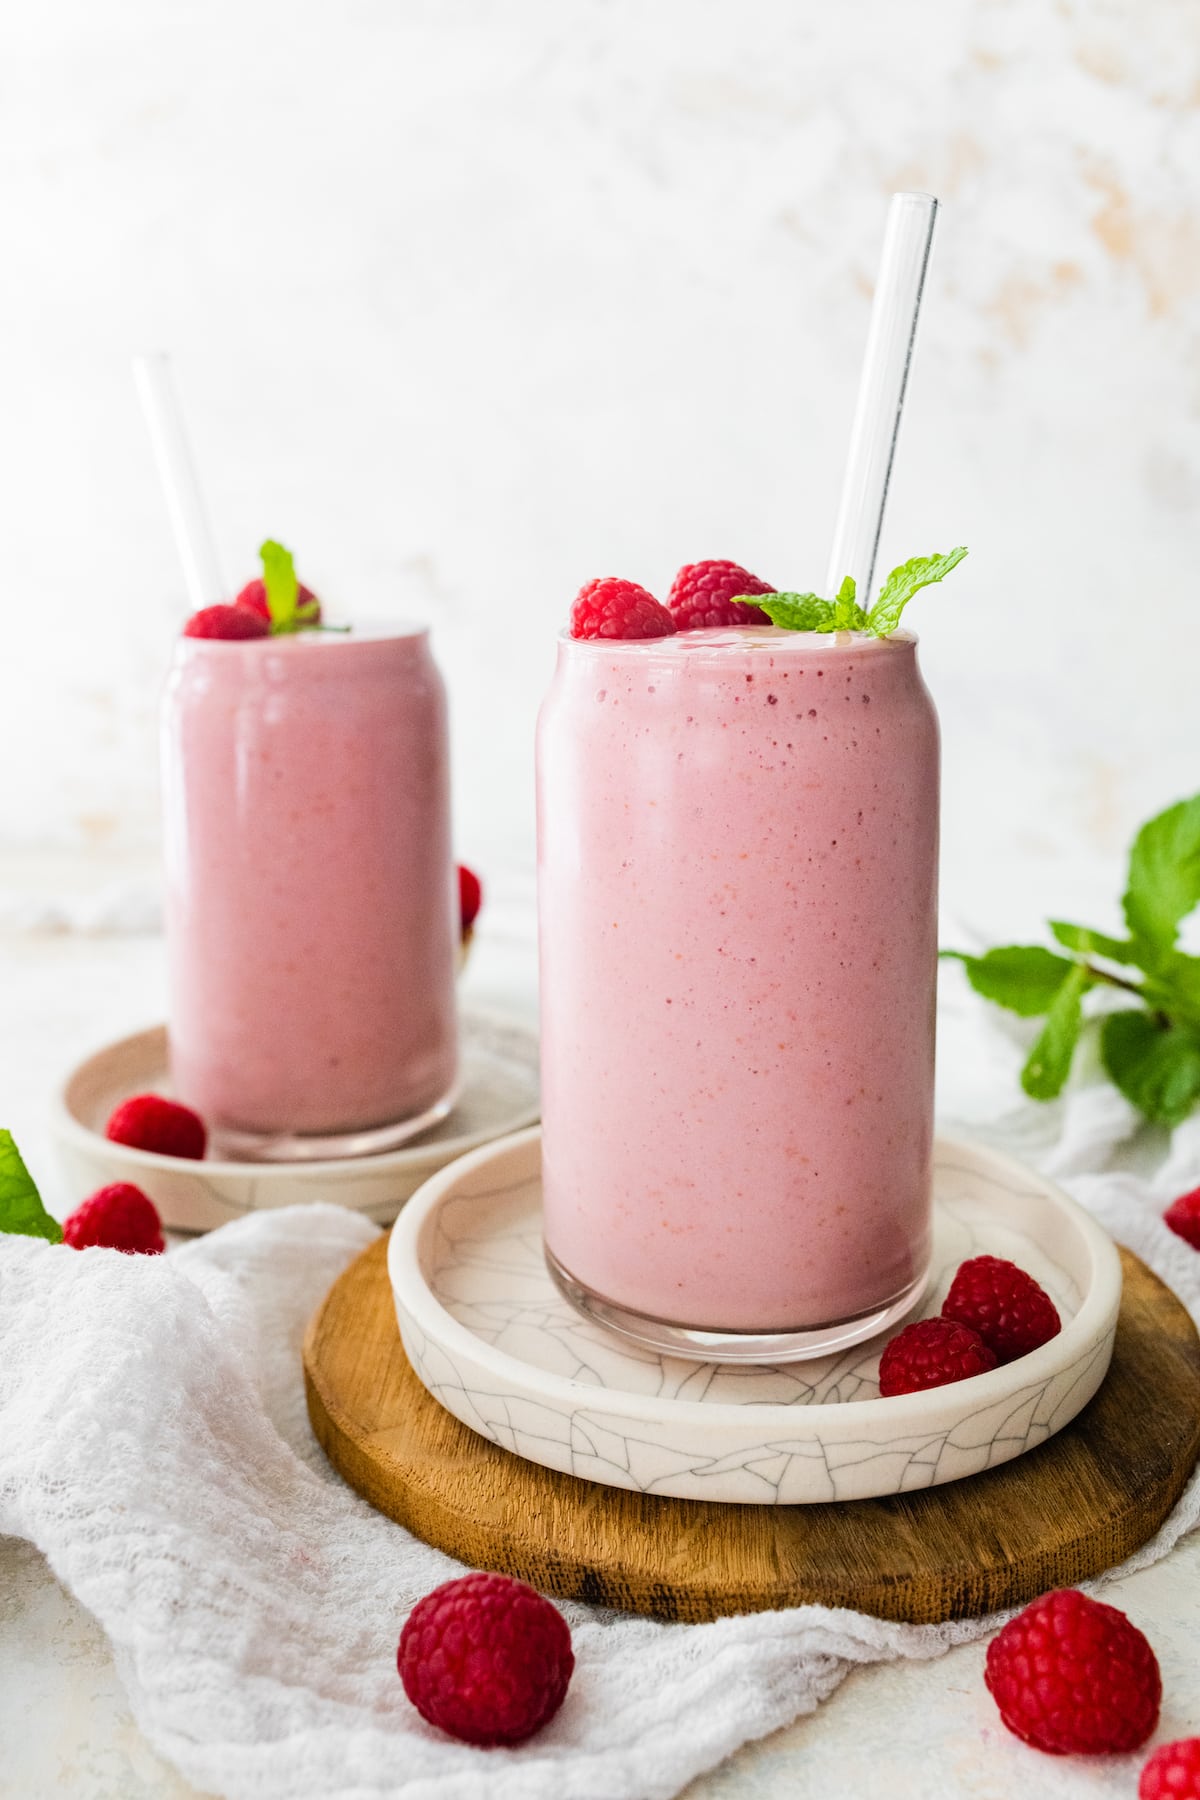 Two raspberry smoothies in glasses with straws.